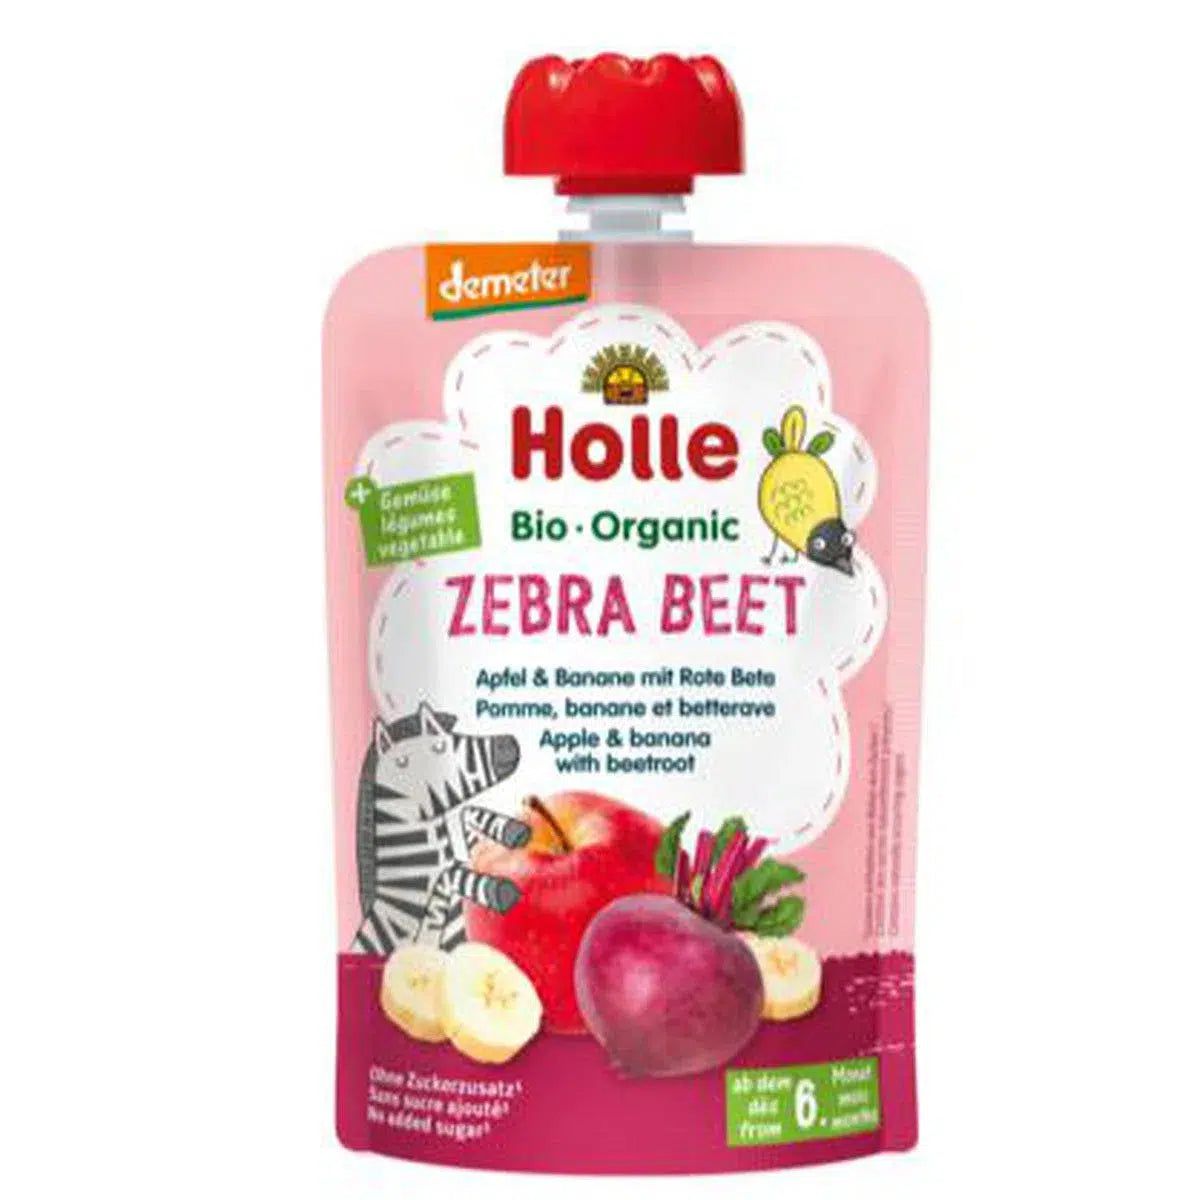 Zebra Beet - Apple & Banana with Beetroot (100g), from 6 months